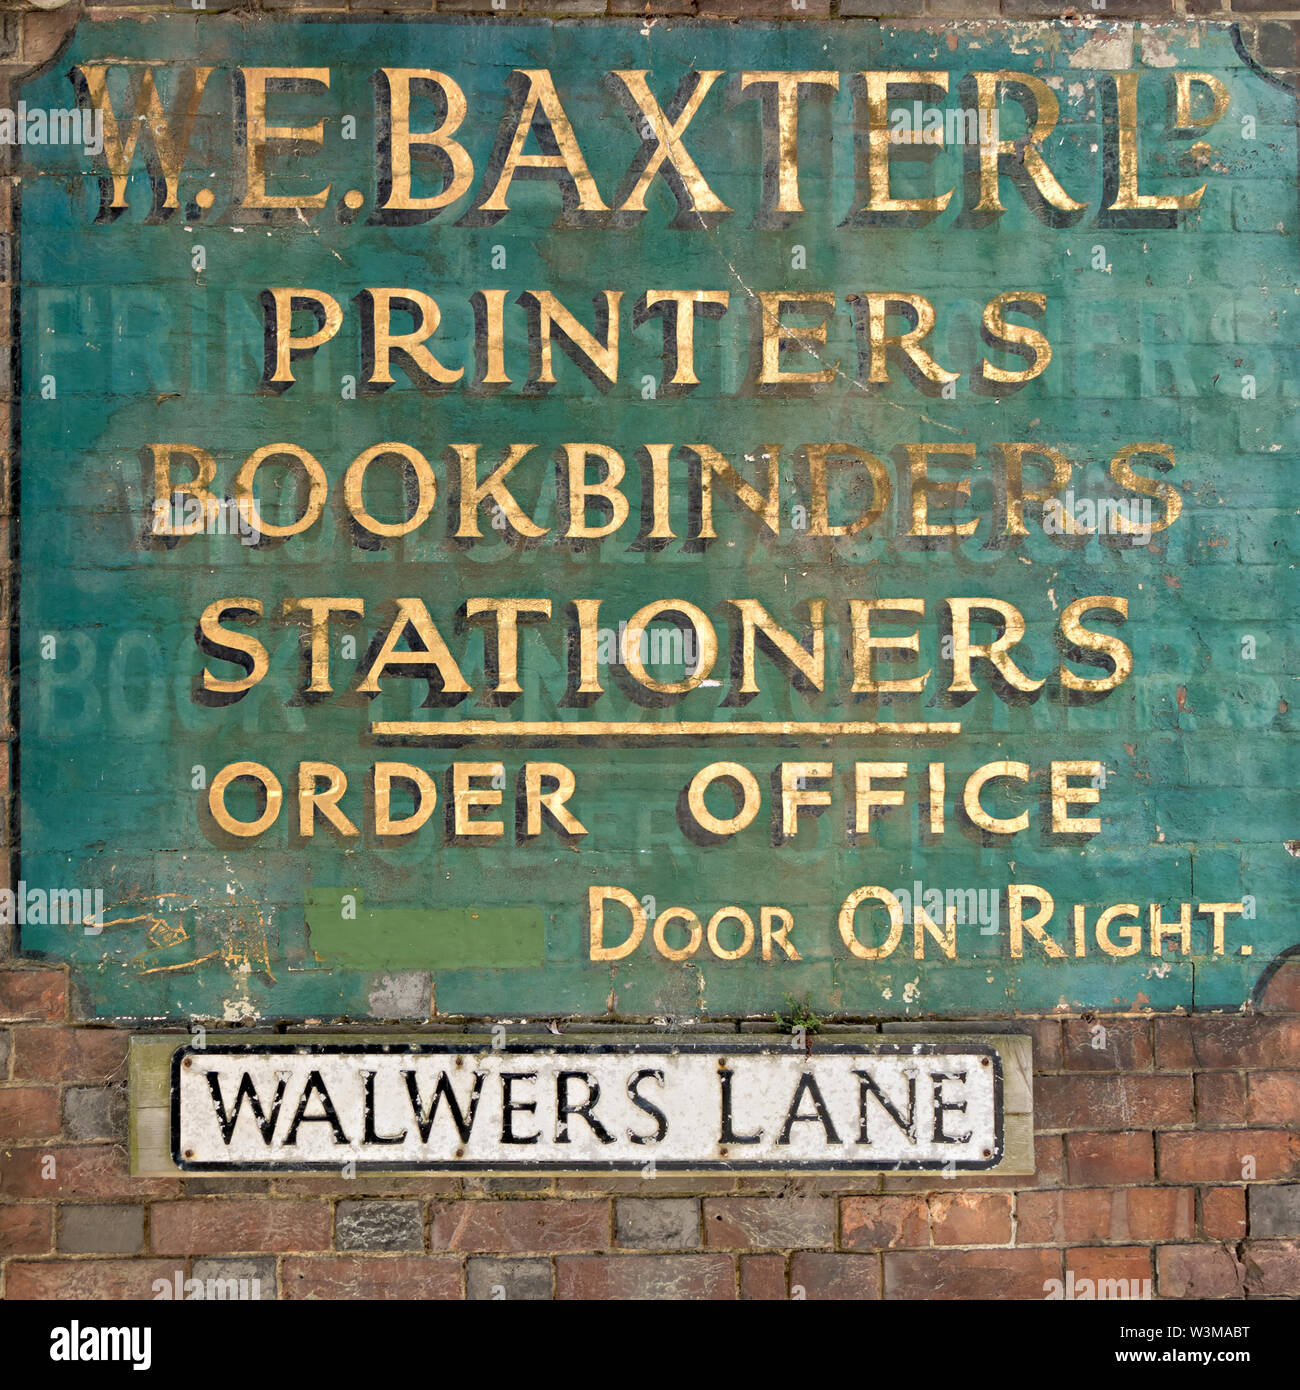 Old antique painted W.E. Baxter Ltd. Bookbinders and Stationers shop sign with faded gold lettering on brick wall Walwers Lane, Lewes, East Sussex, UK Stock Photo